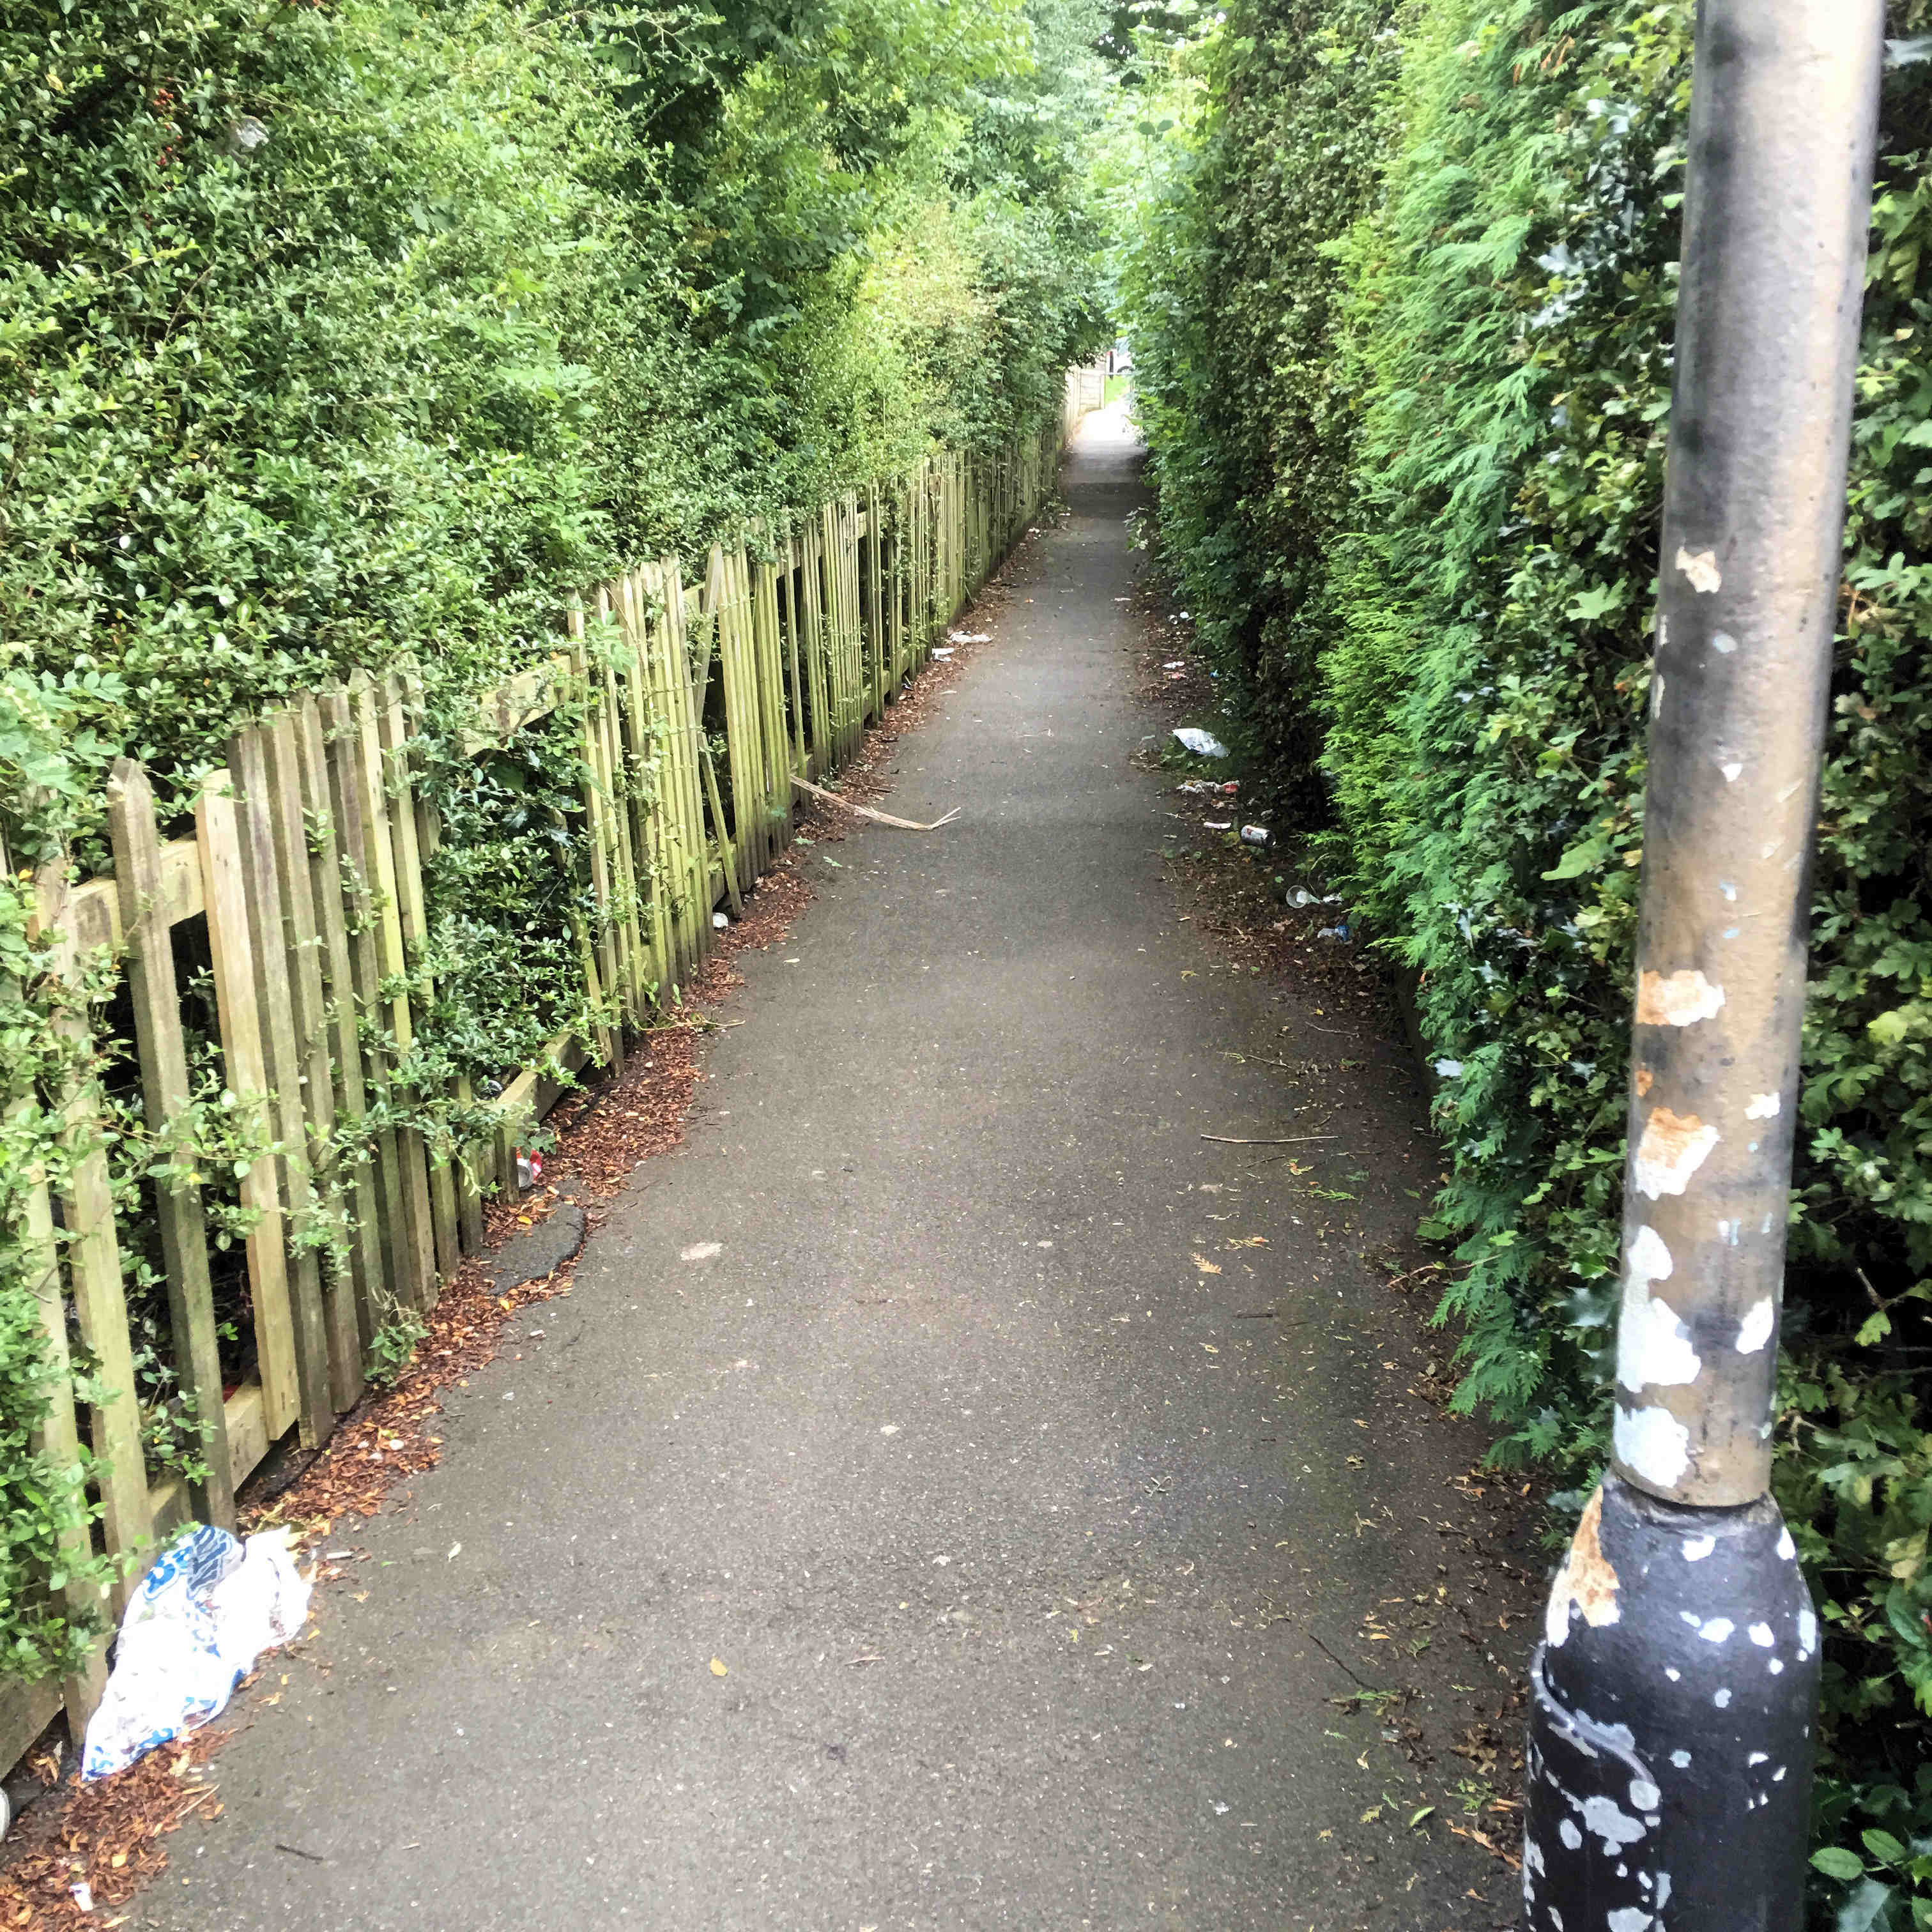 Main issues raised by residents included car parking and lack of maintenace of trees and bushes. The Grange Lane/Parker Avenue was a particular source of complaint. The snicket is overgrown and subject to littering. Some residents want to see it closed. although this is unlikely as it is a Public Right of Way.